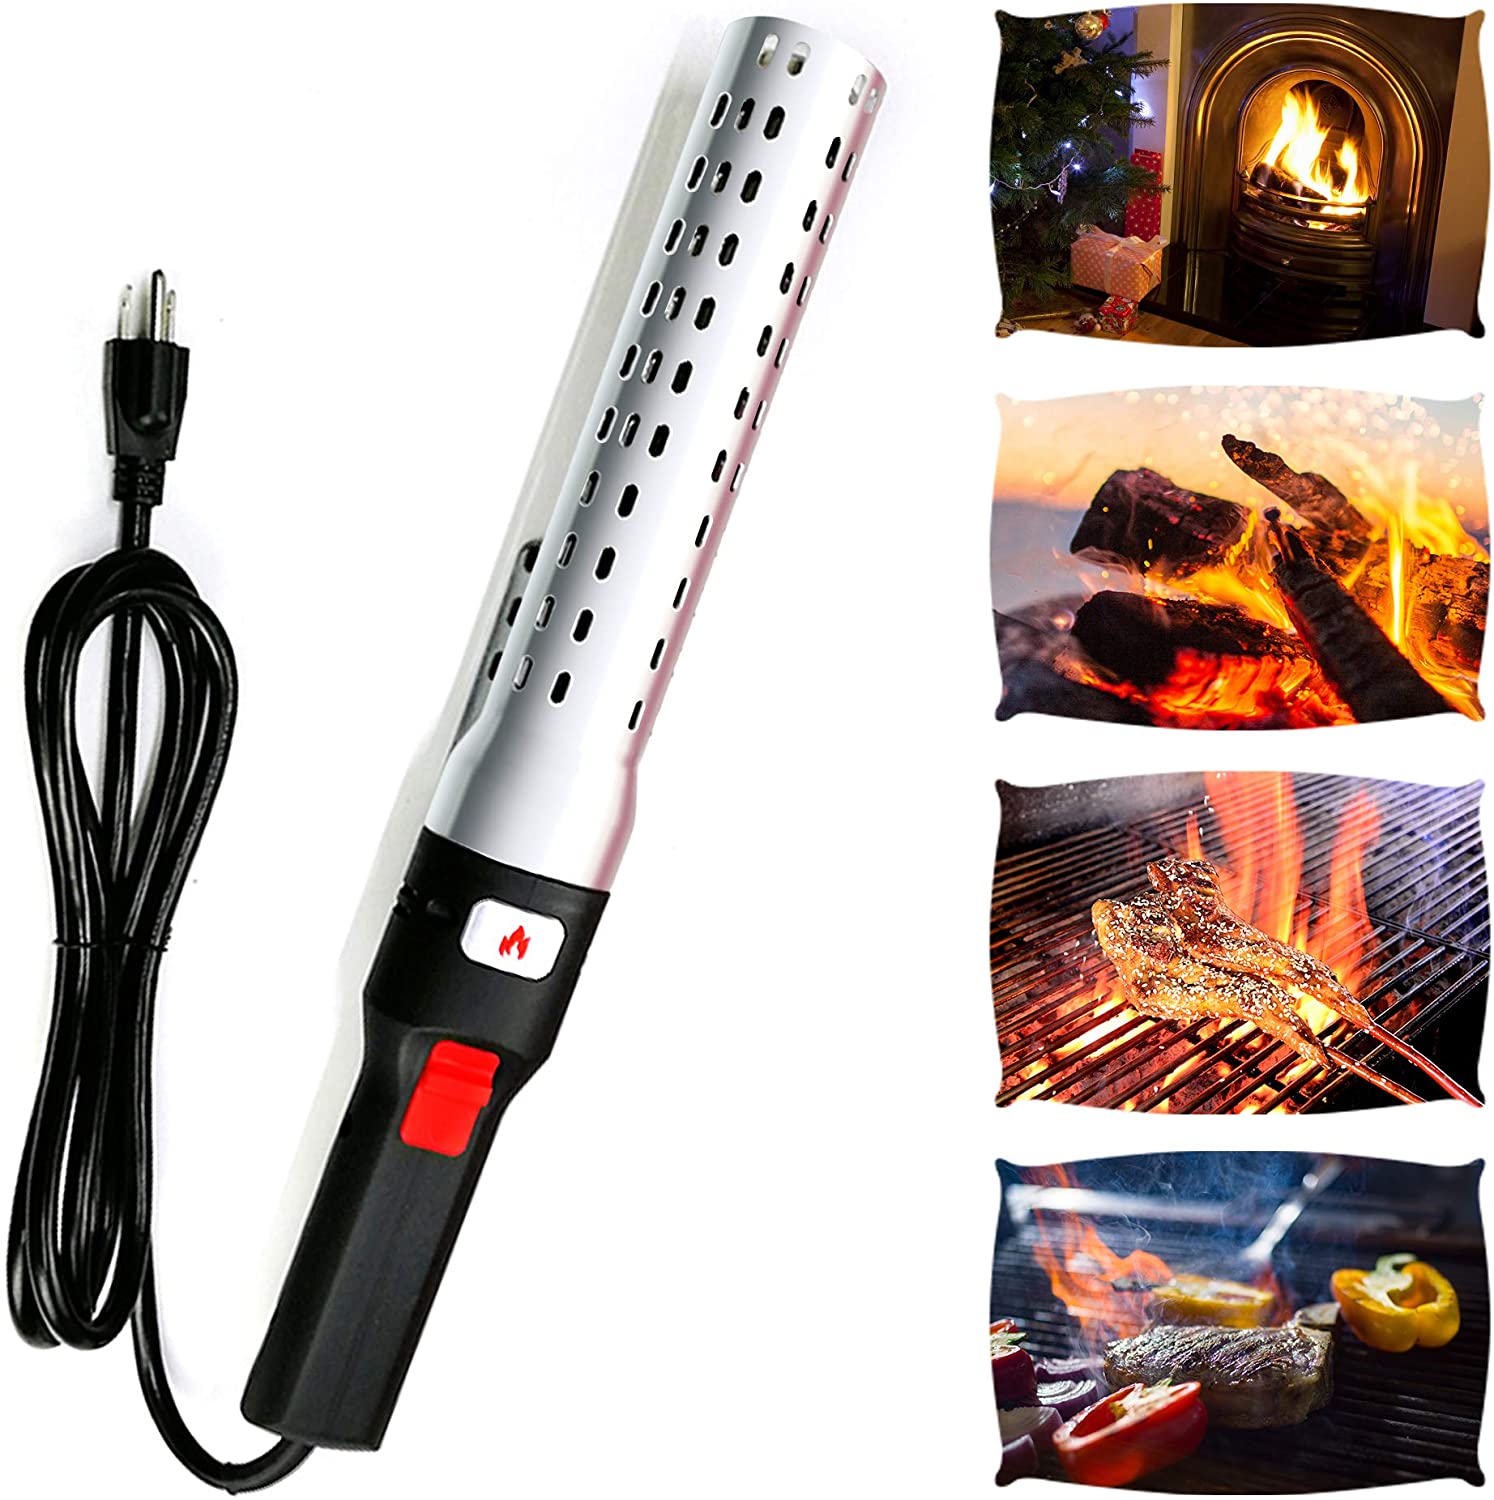 Electric Coal Starter and Lighter, Fire Starter, BBQ Smoker, Grill Starter with Built-in Blower, Super Quick BBQ Ignites Briquettes, Wood, Fireplaces and Fire Pits